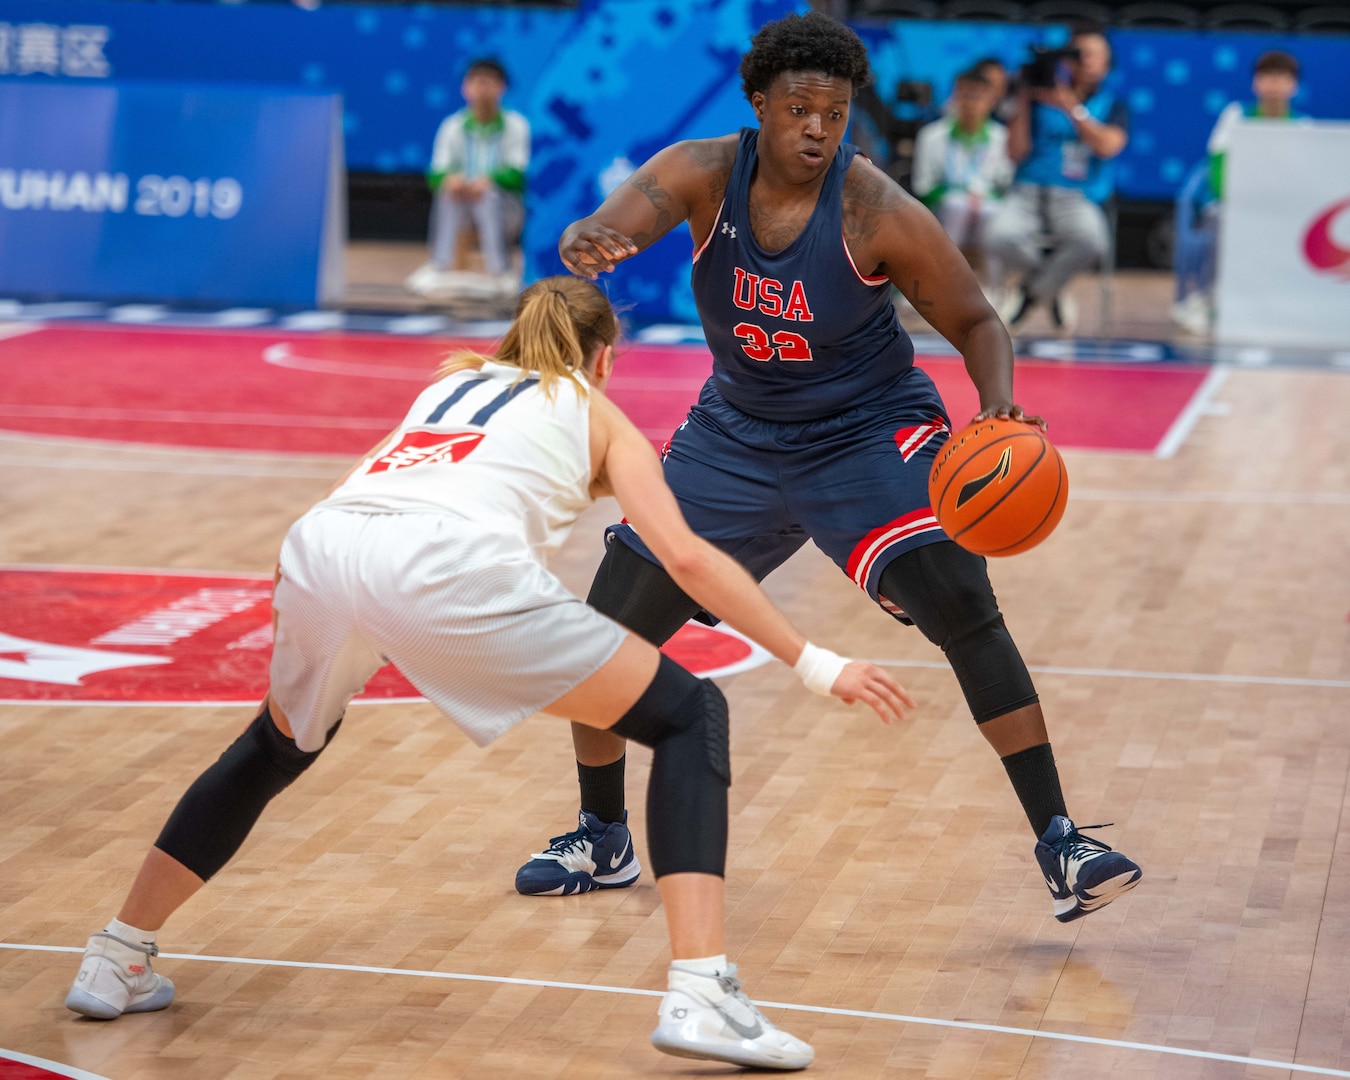 U.S. Air Force 2nd Lt. Charmaine Clark, U.S Armed Forces Women’s Basketball team member, looks to dribble past a defender during the 7th Council for International Sports for the Military World Games in Wuhan, China Oct. 19, 2019. The U.S. team defeated France 67 to 65. (U.S. DoD photo by Staff Sgt. Vito T. Bryant)